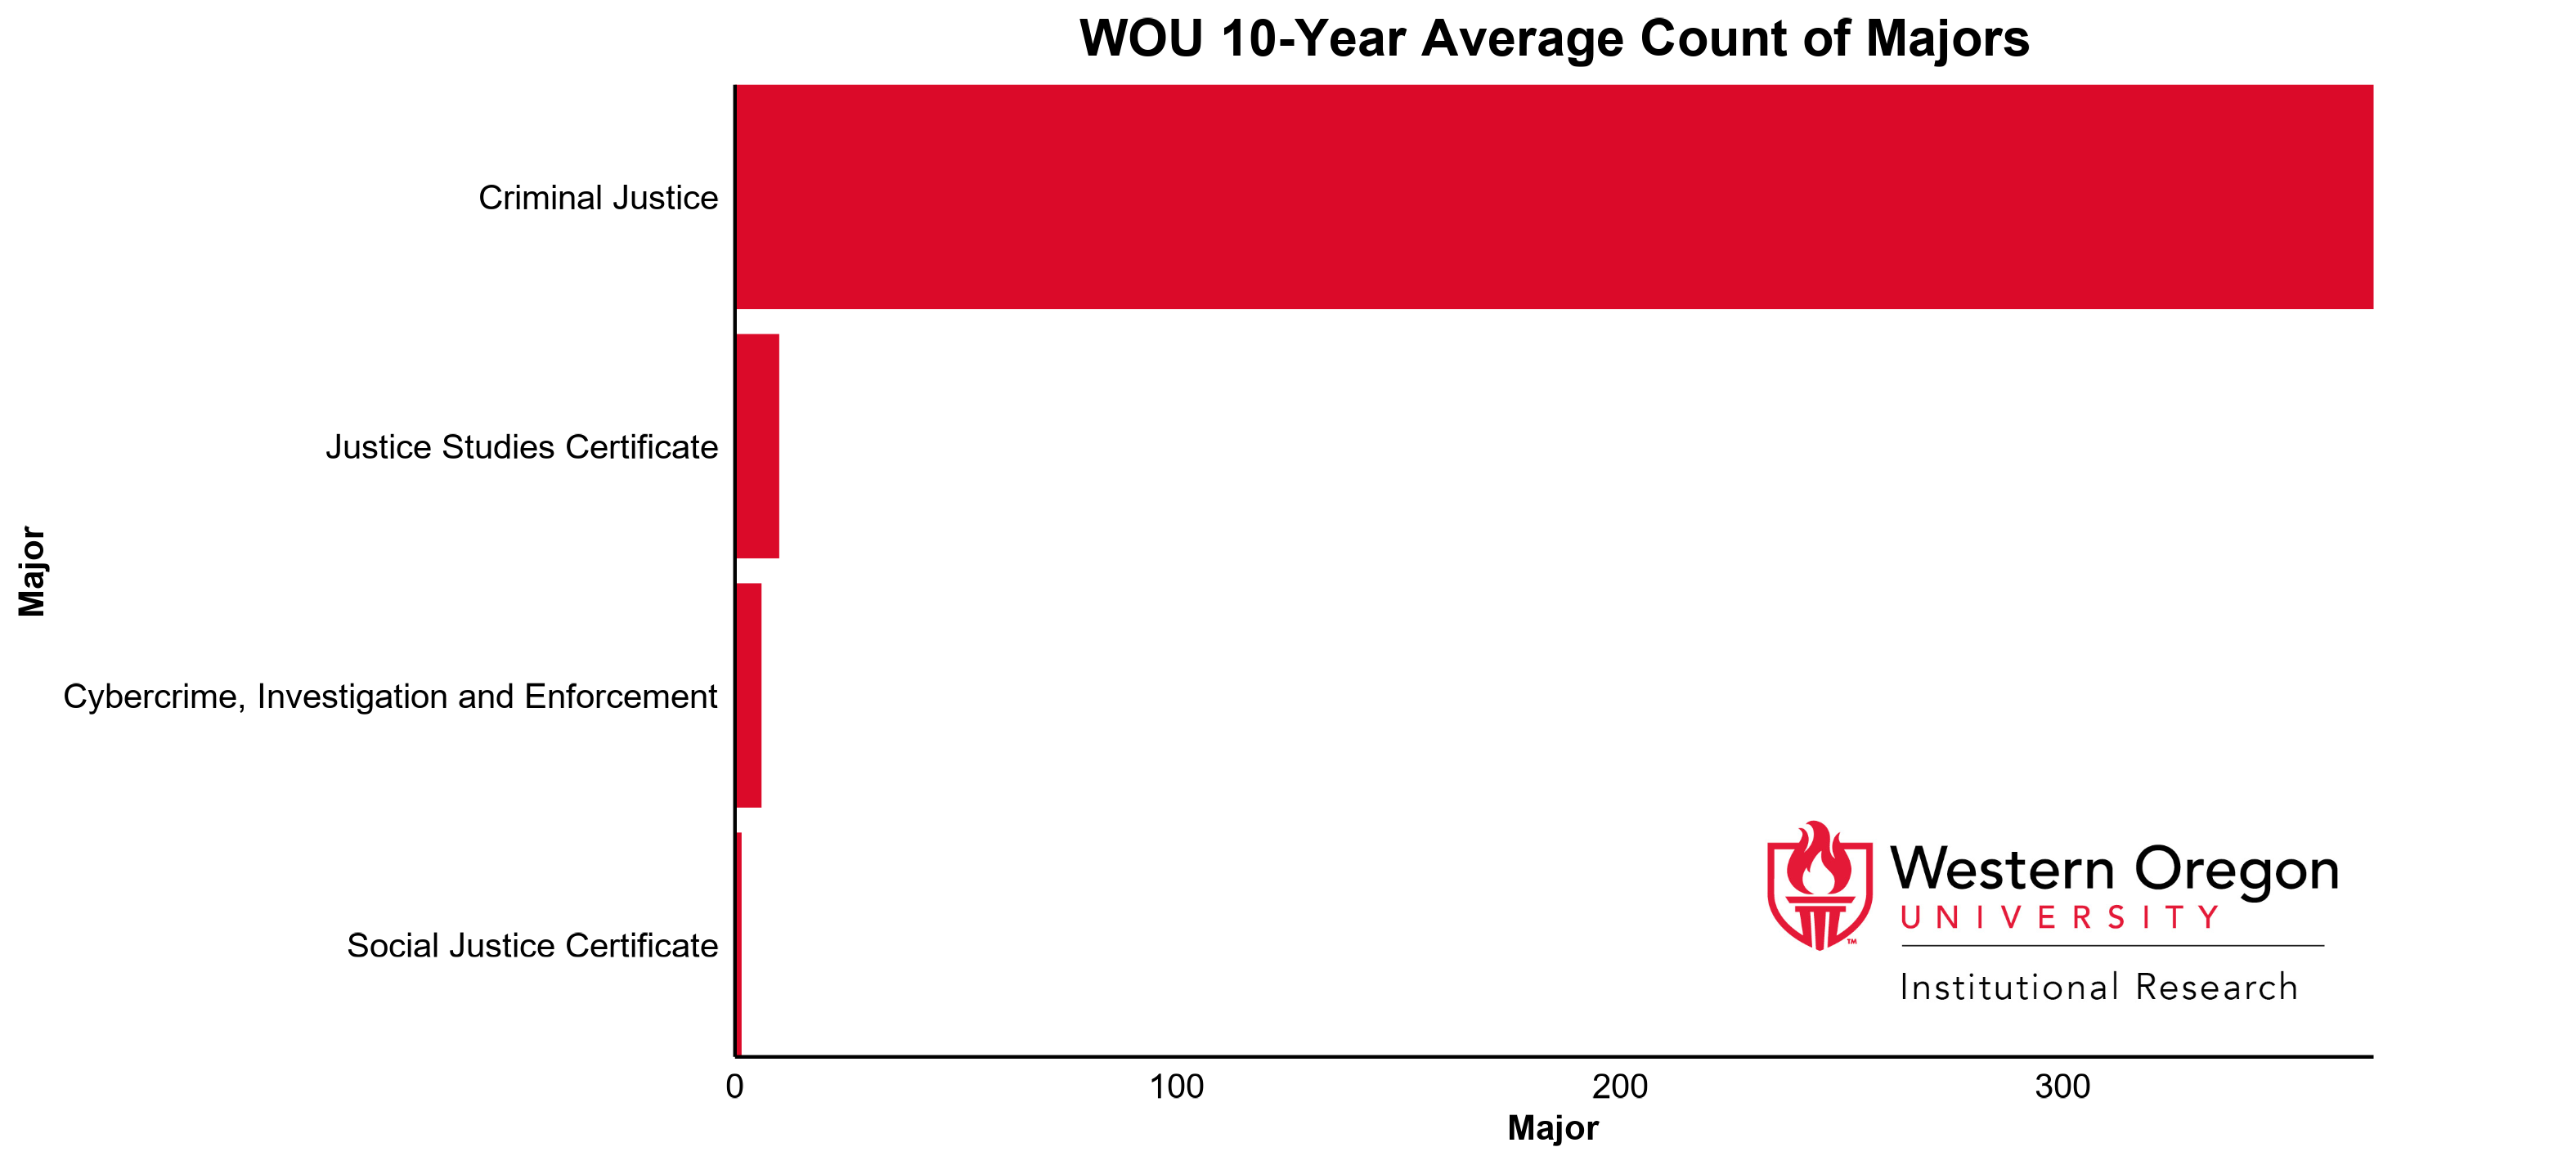 Bar graph of the 10-year average count of majors at WOU for the Criminal Justice Sciences division